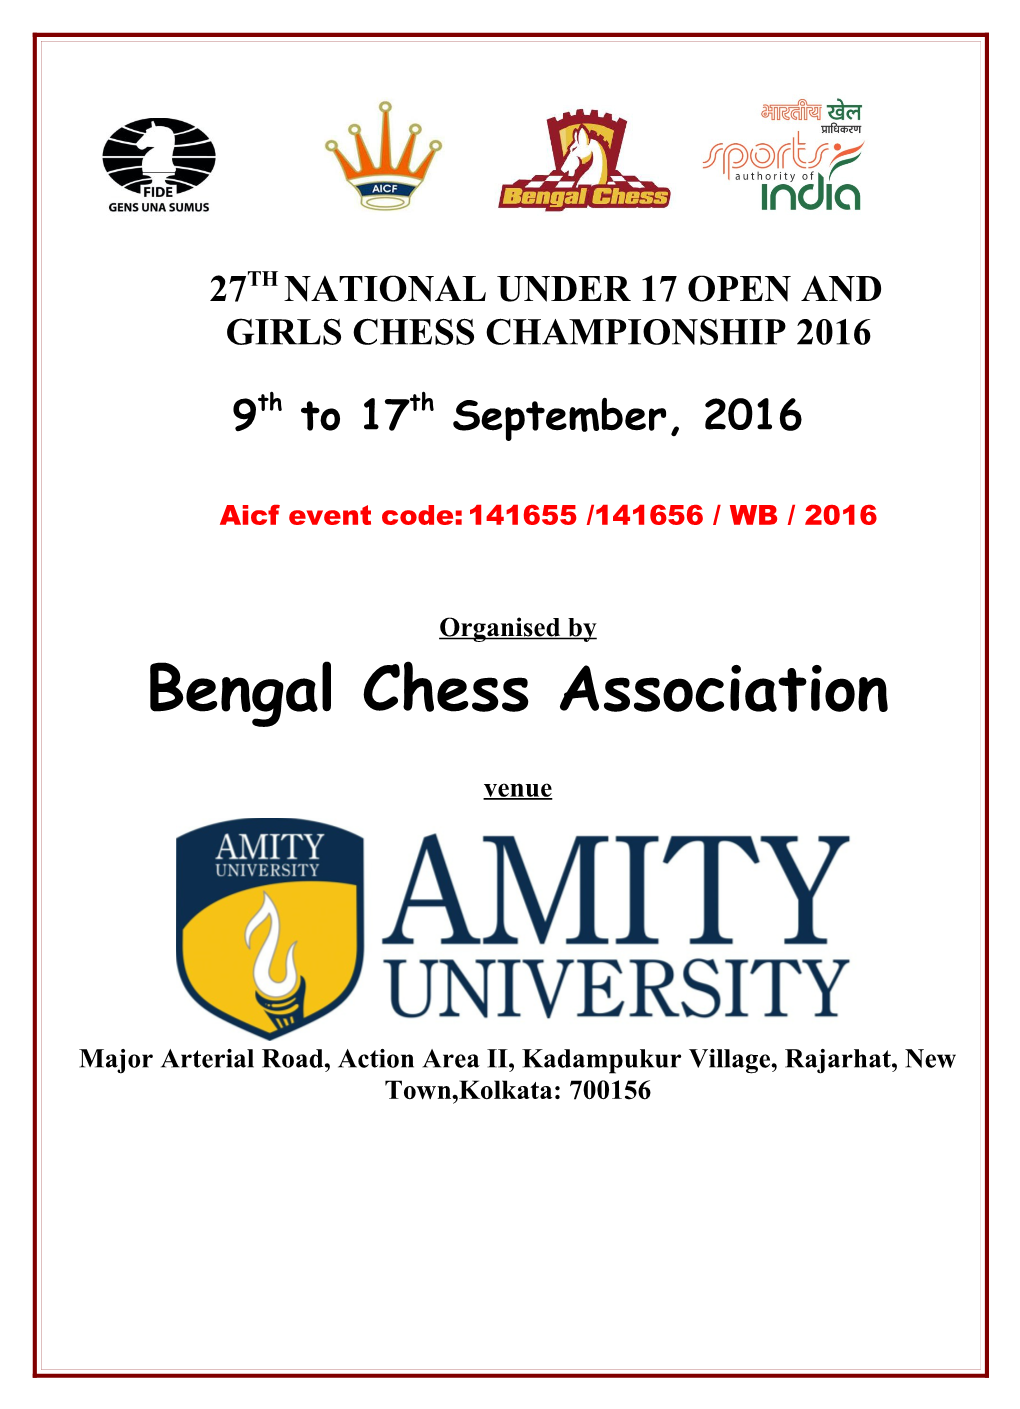 27Thnational Under 17 Open and Girls Chess Championship 2016